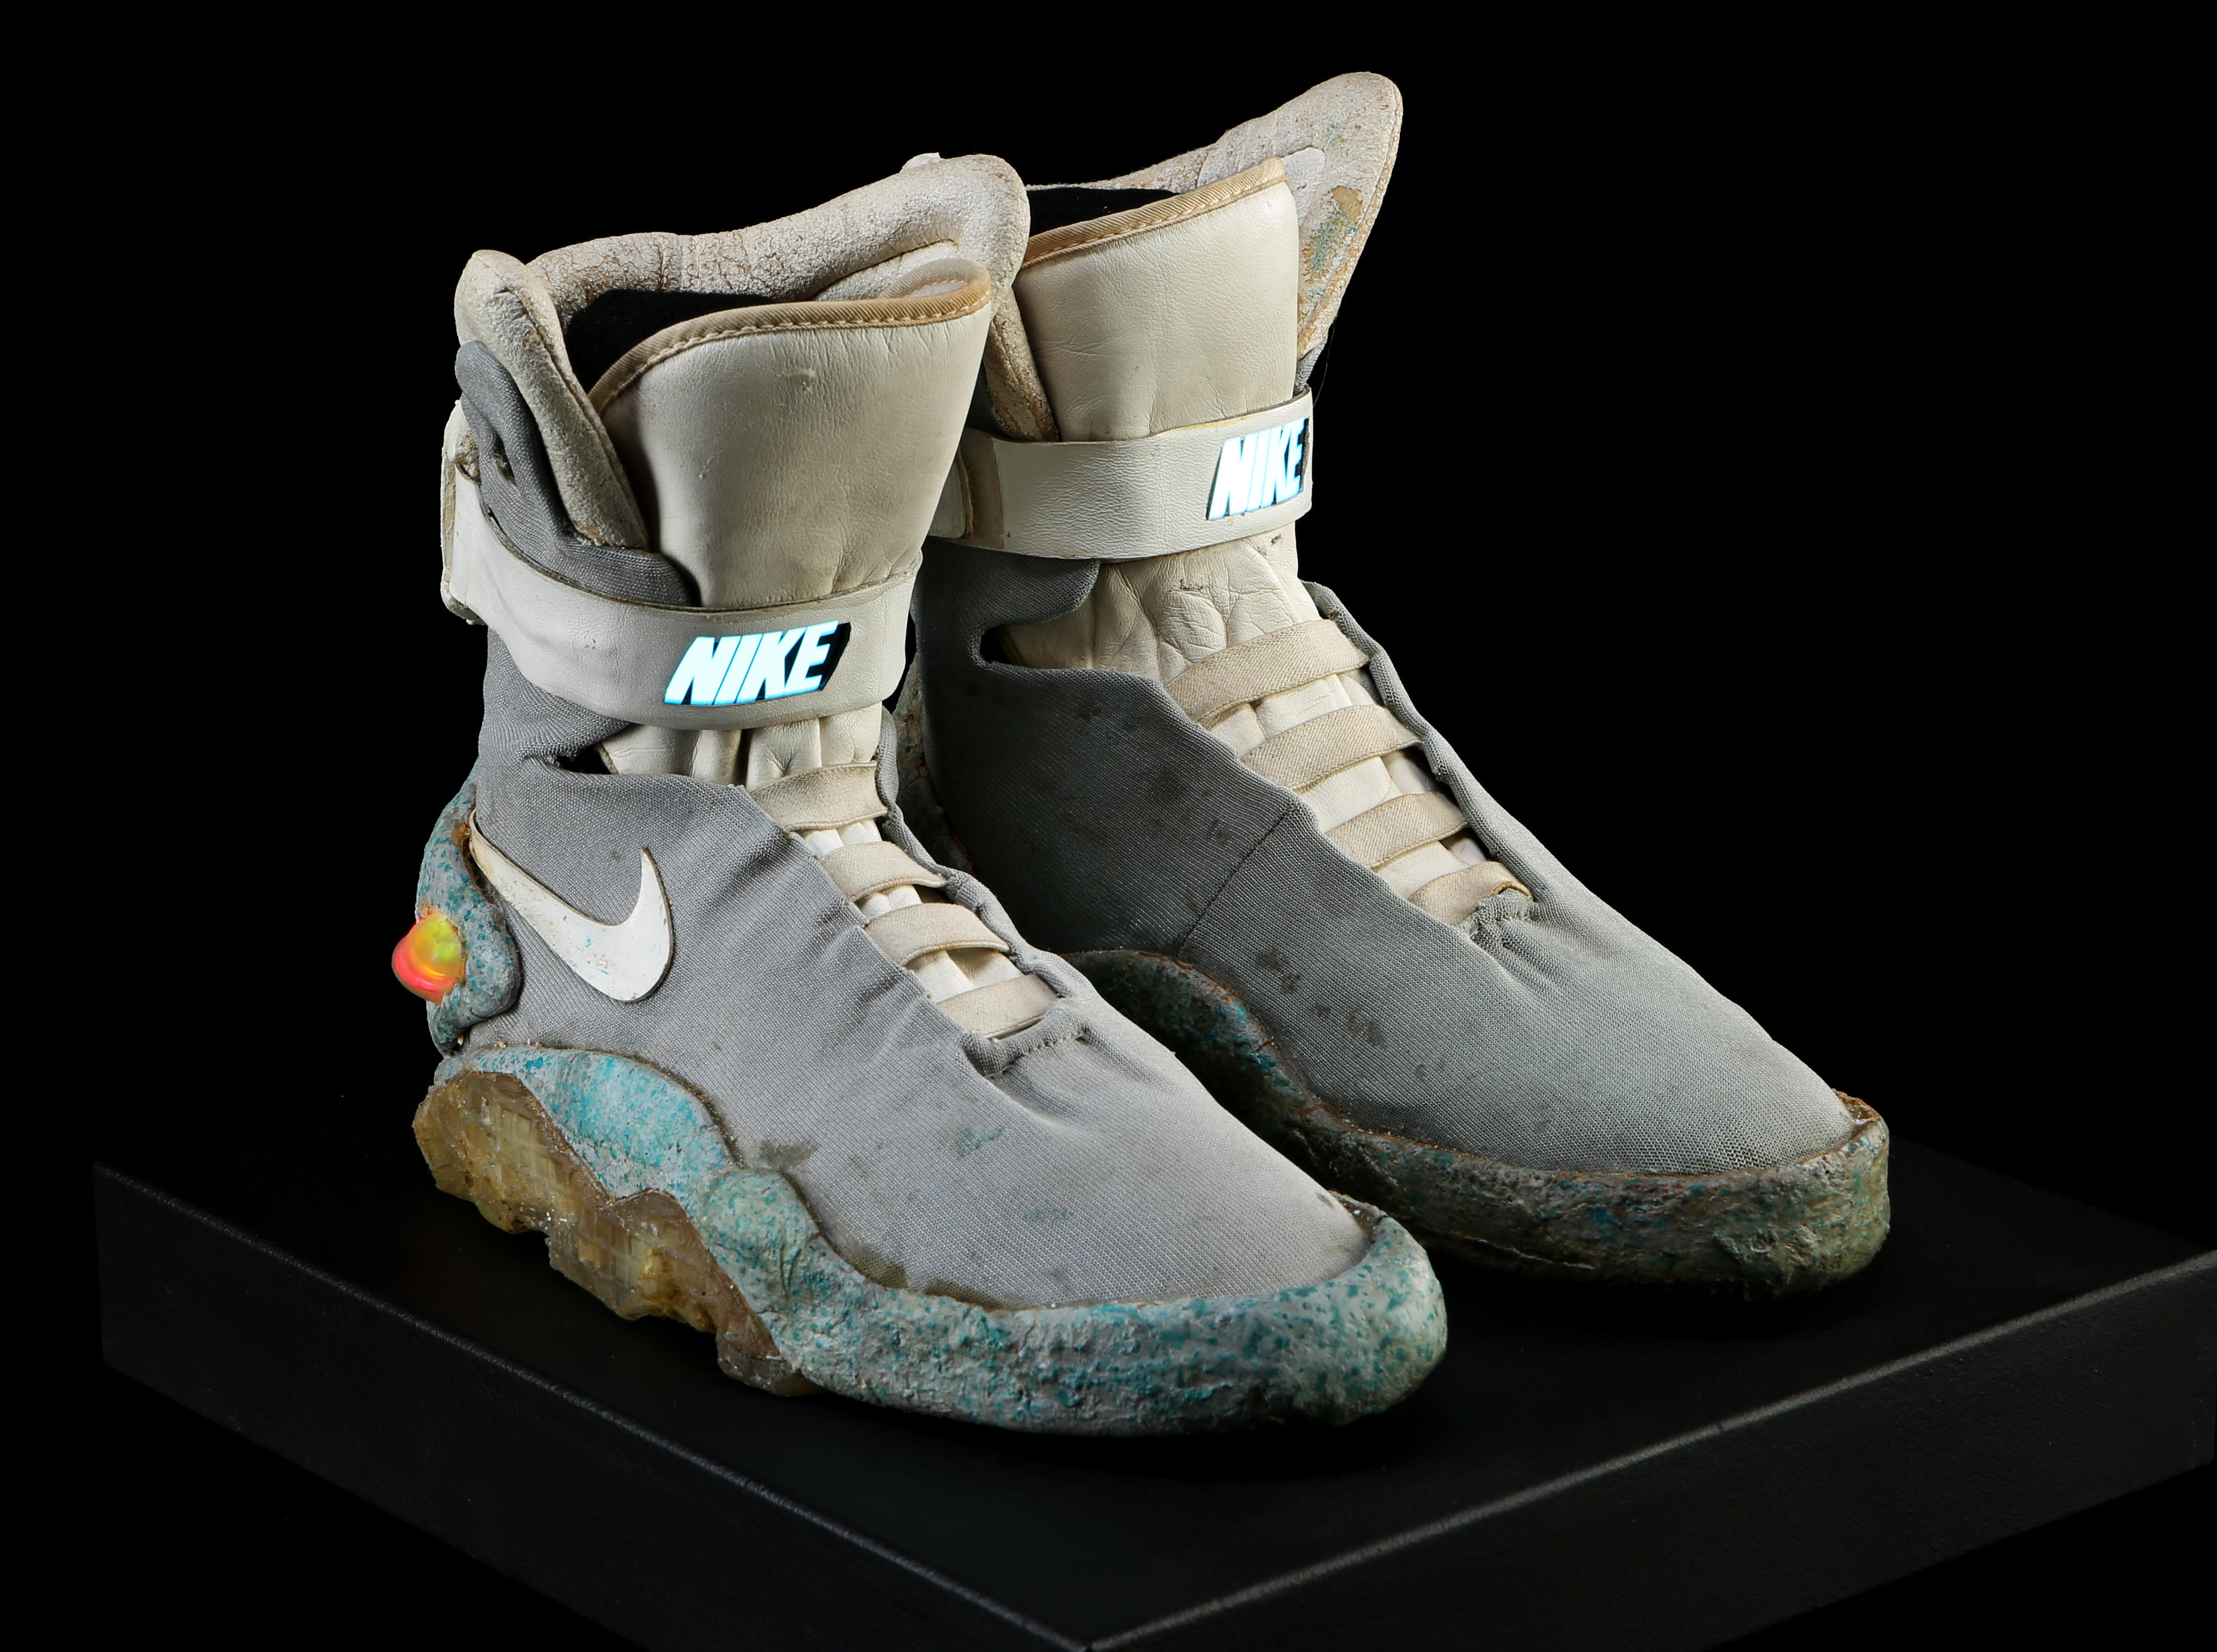 Back to the Future' Nike Mag shoes can 